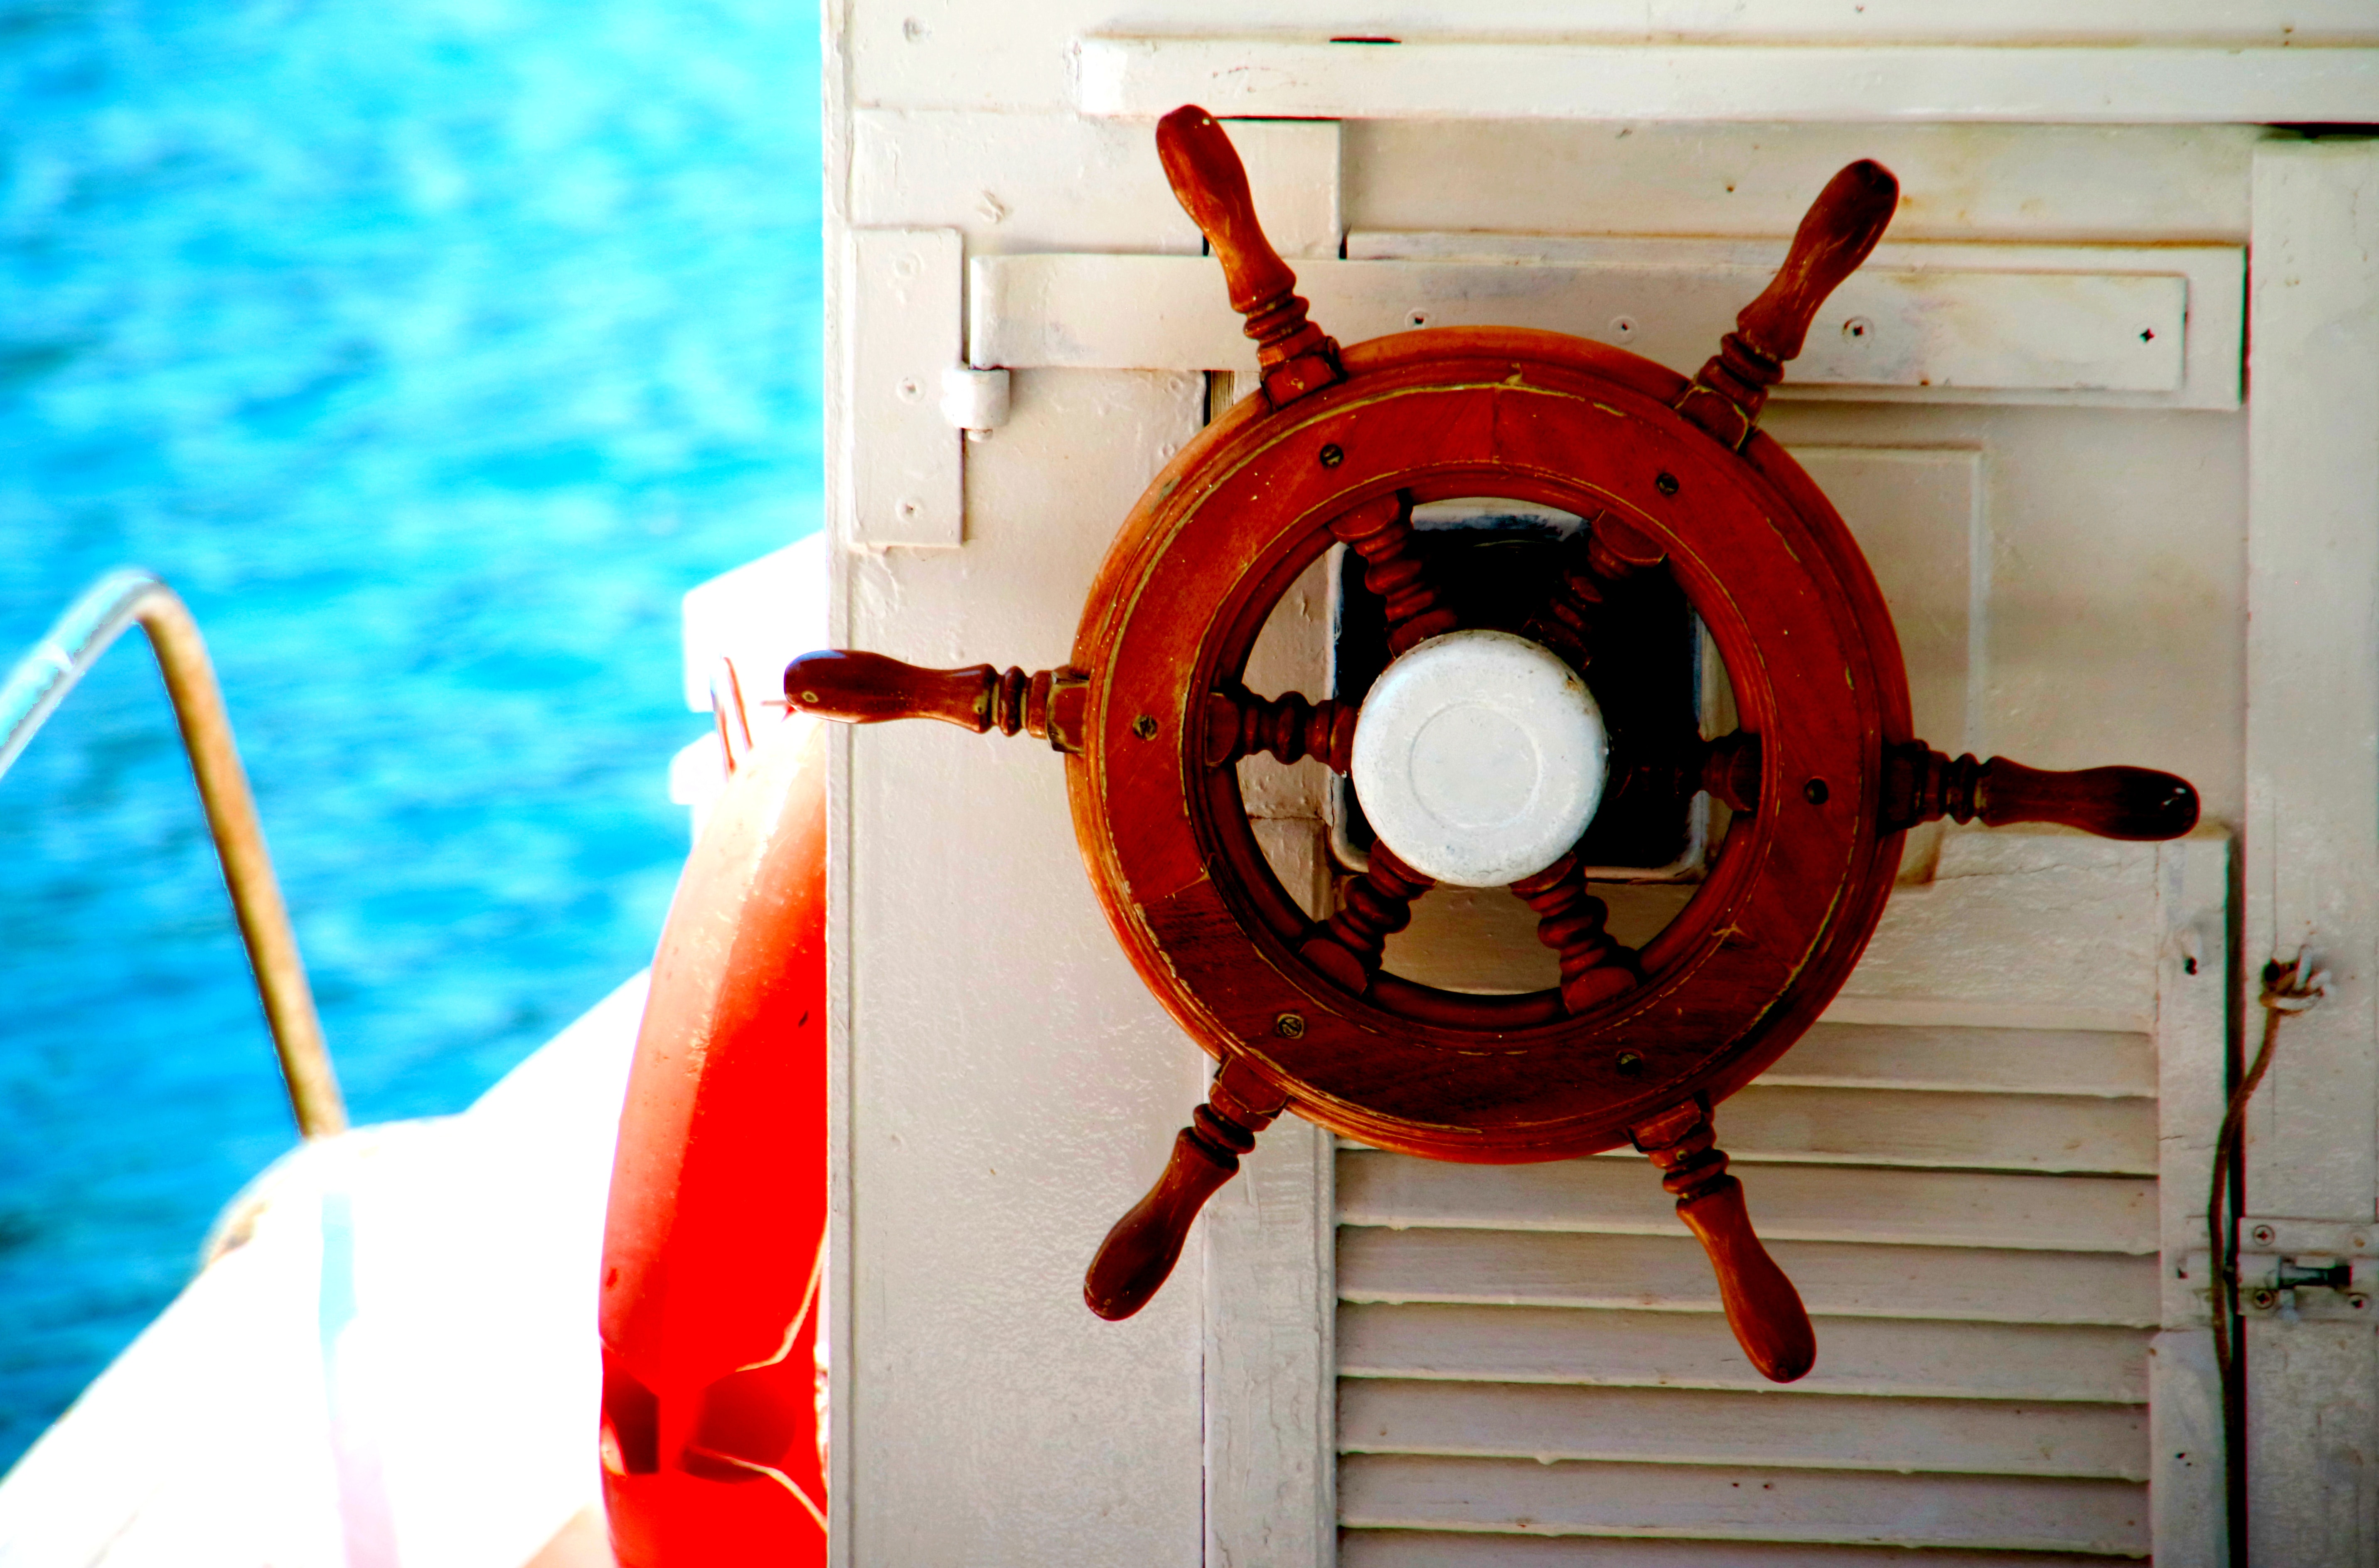 You probably shouldn’t be using Kubernetes for your new startup